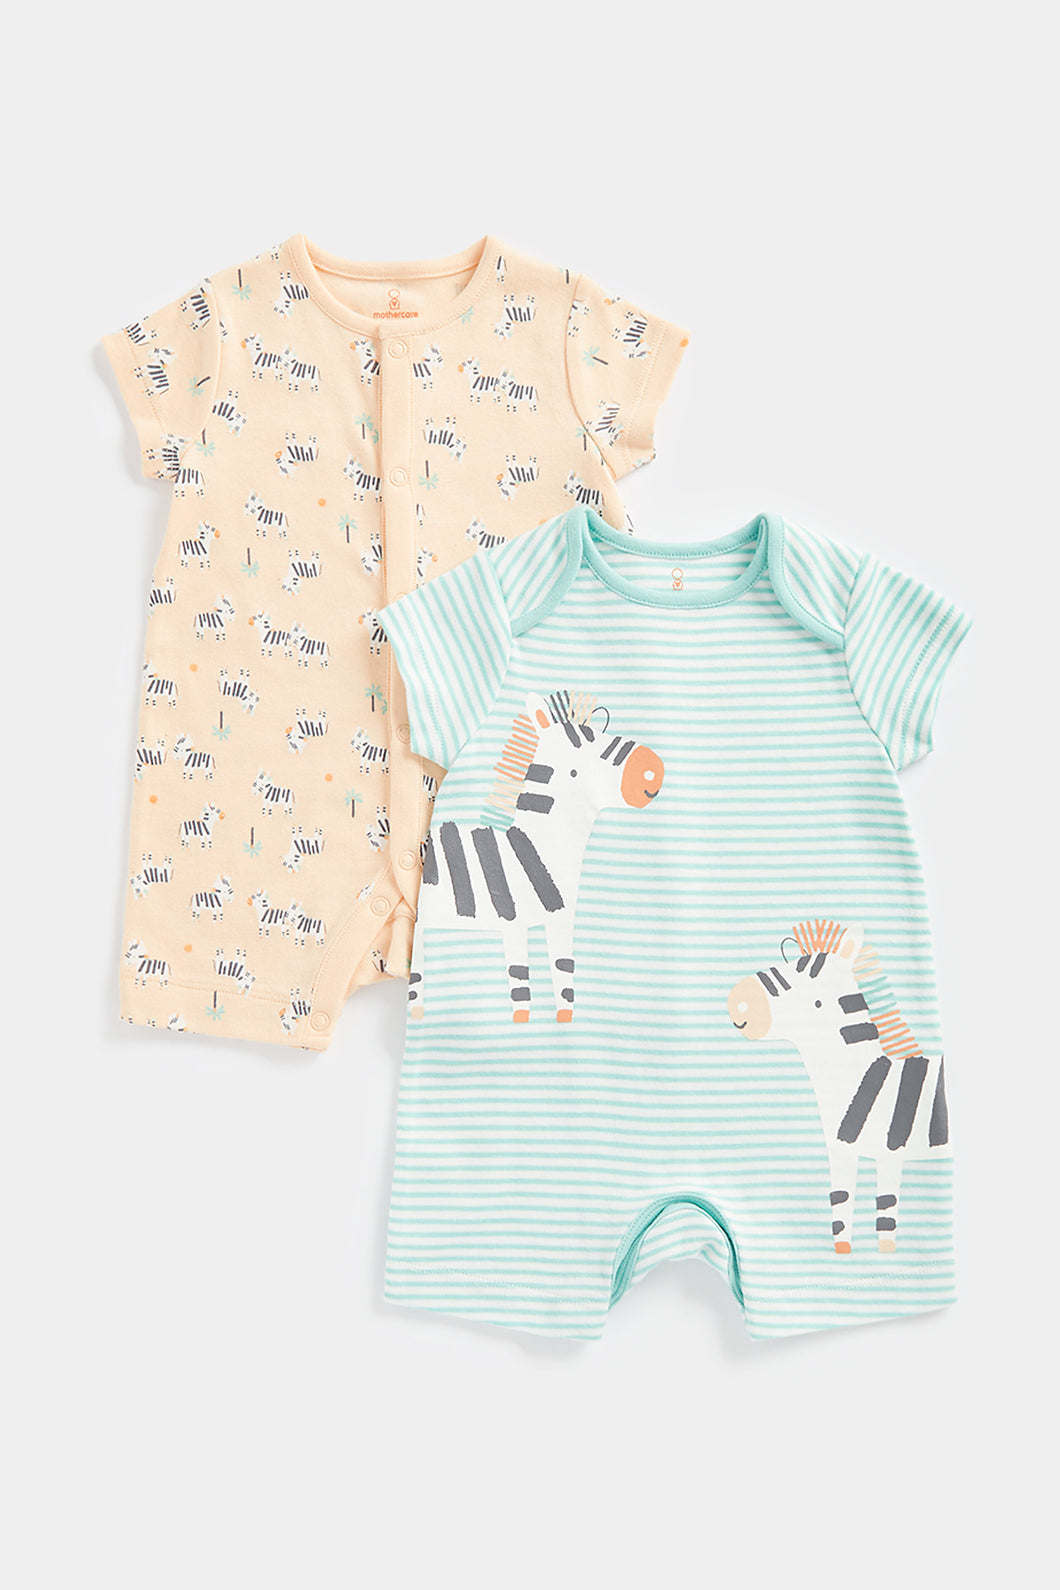 Mothercare Zebra Rompers - 2 Pack